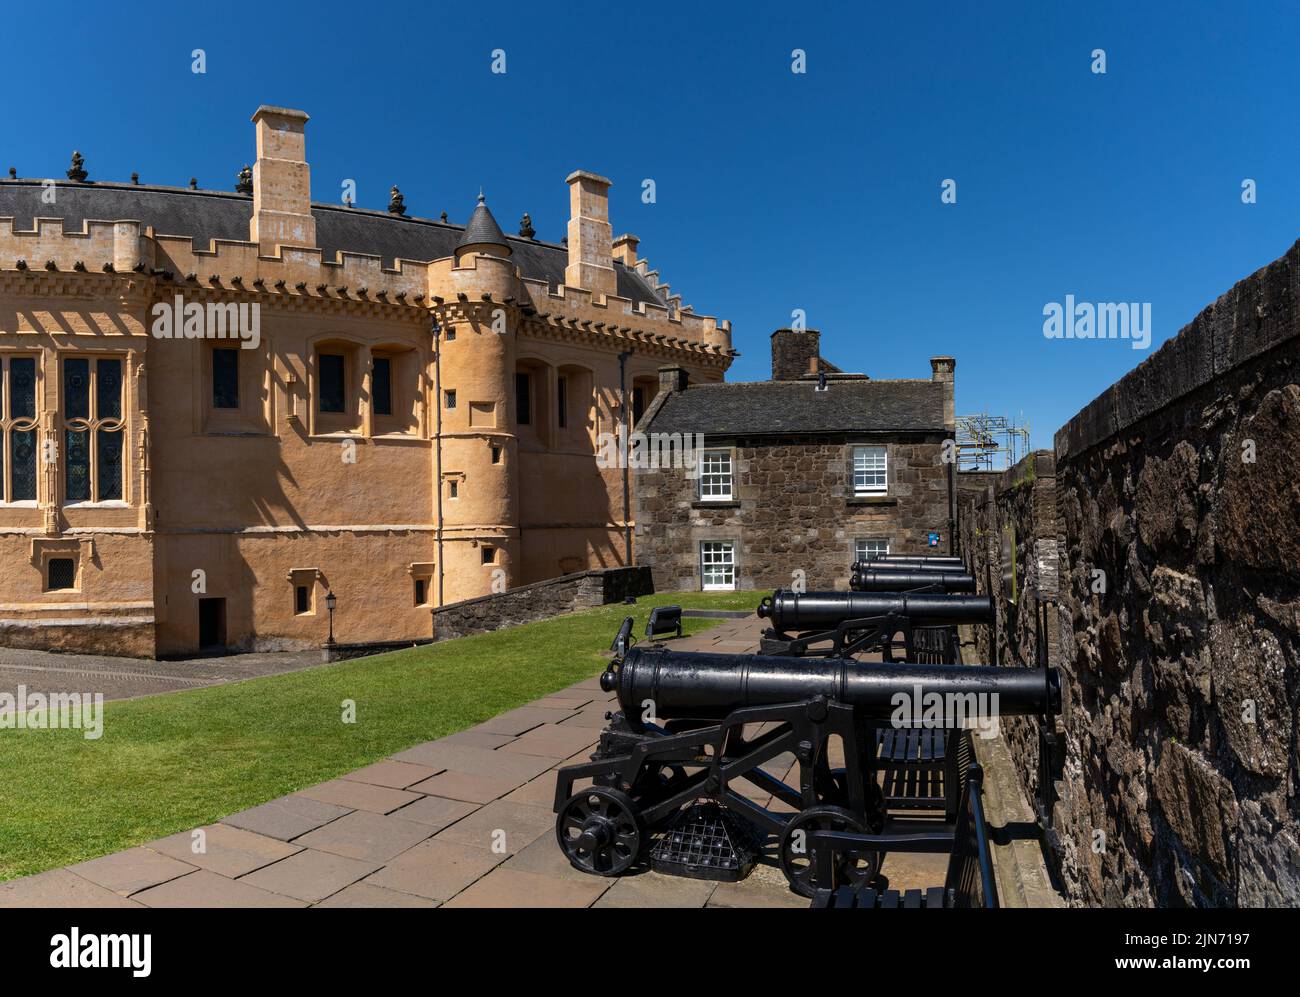 Stirling, United Kingdom - 20 June, 2022: view of the Stirling Castle courtyard with cannons on the battlements and the Great Hall in the background Stock Photo